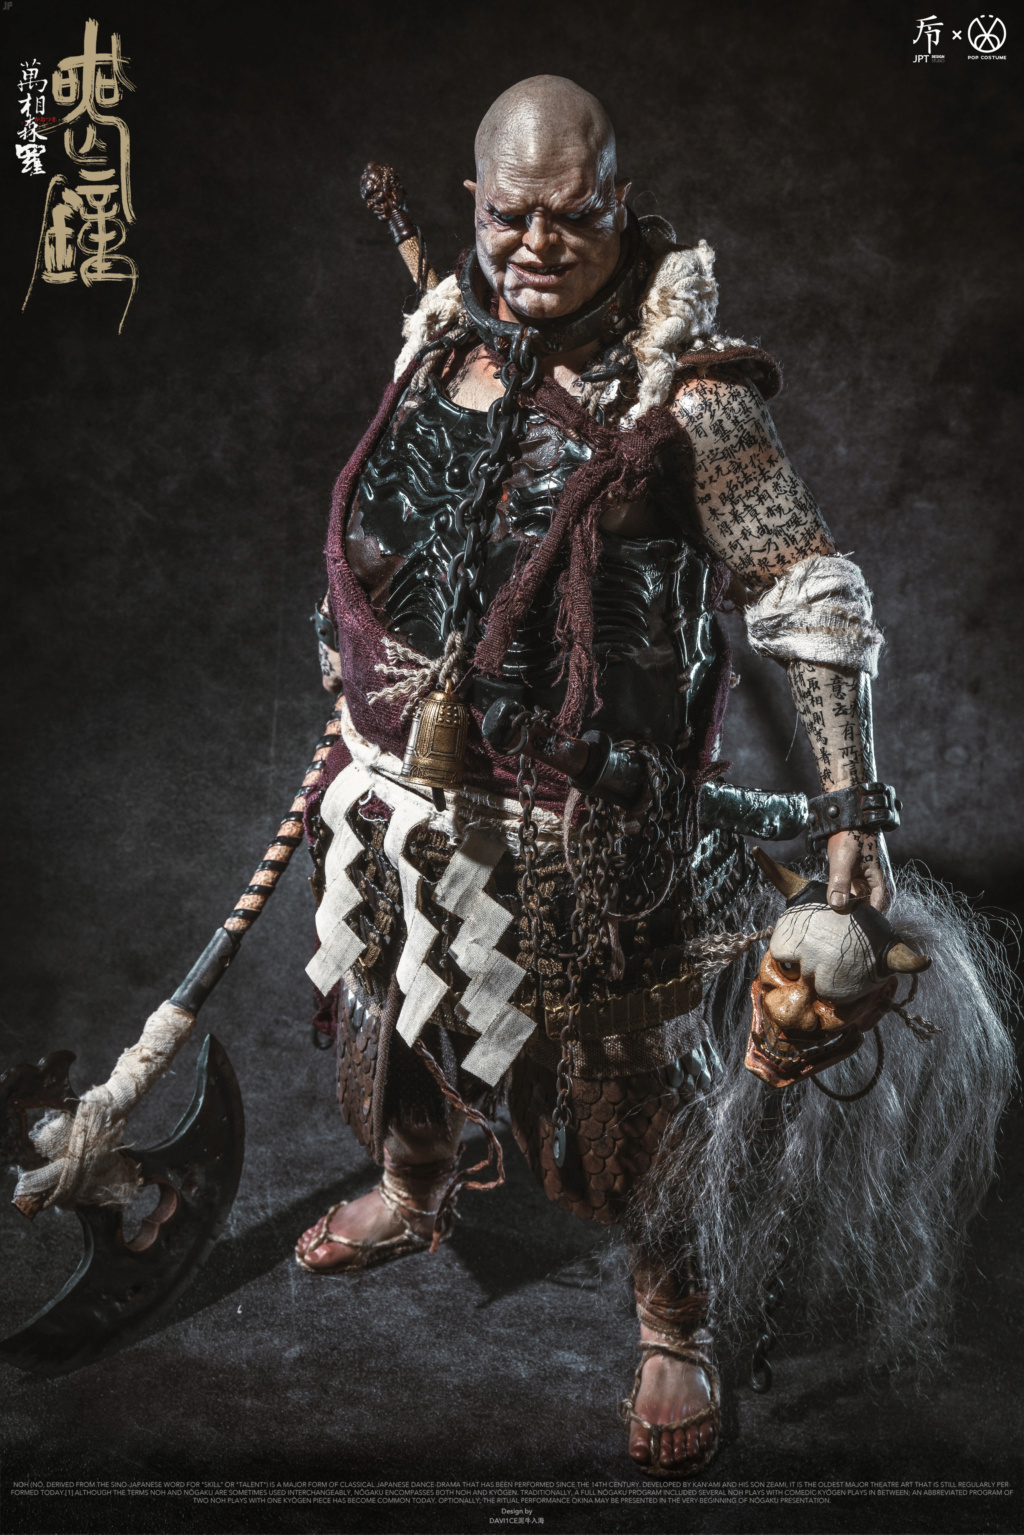 POPCOSTUME - NEW PRODUCT: JPT Design & POP COSTUME: JPT-008 1/6 Scale KNELL (2 Styles) 66d79210